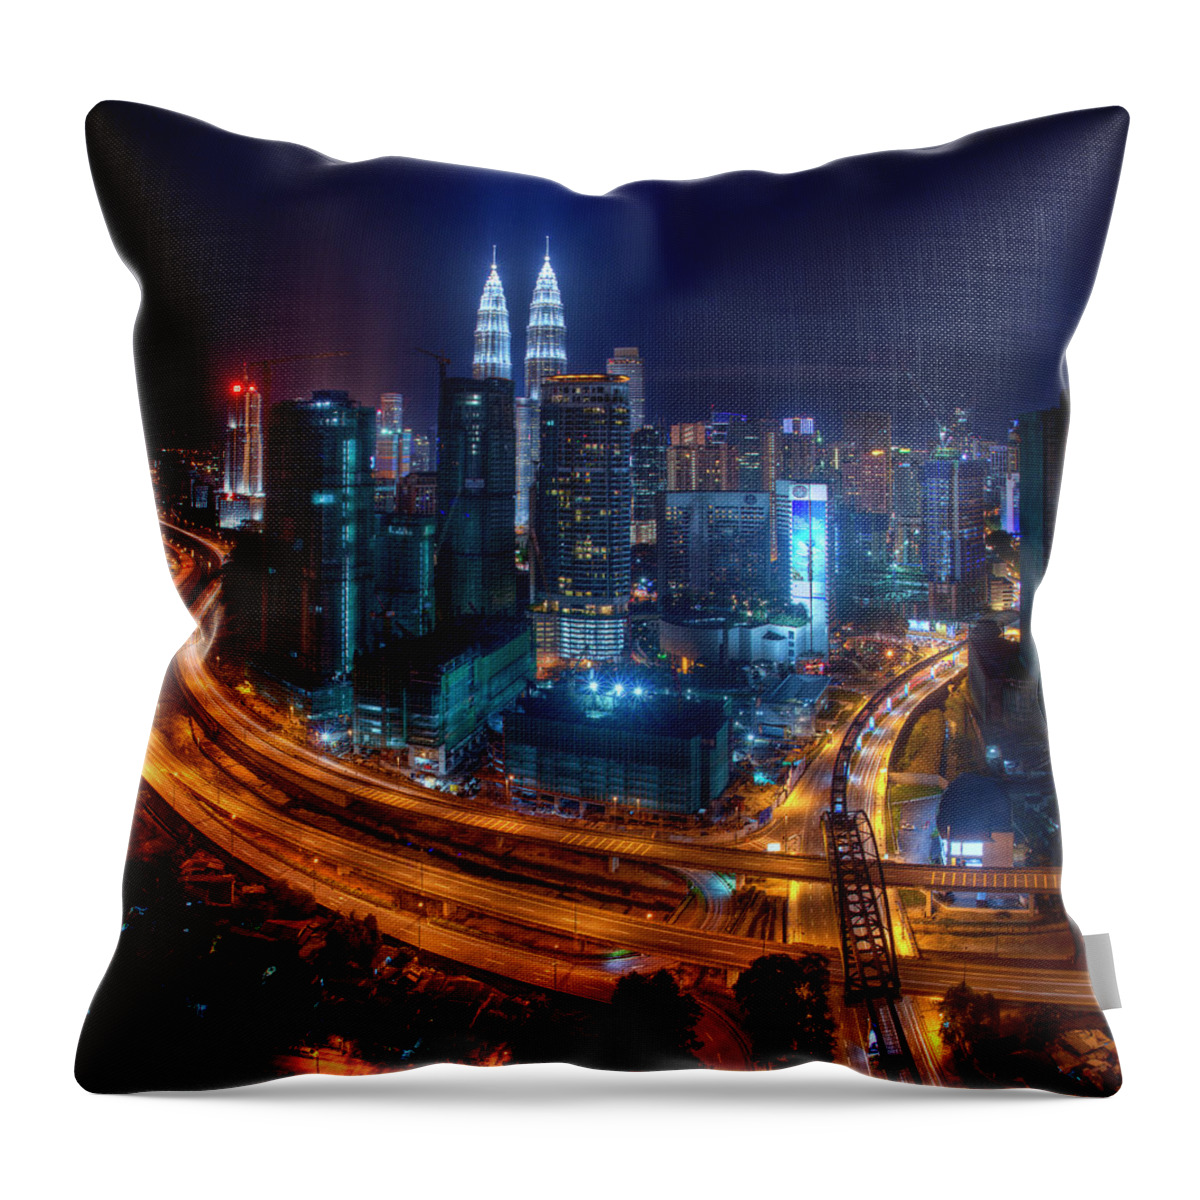 Outdoors Throw Pillow featuring the photograph Two Direction In Klcc by Rithauddin Photographer